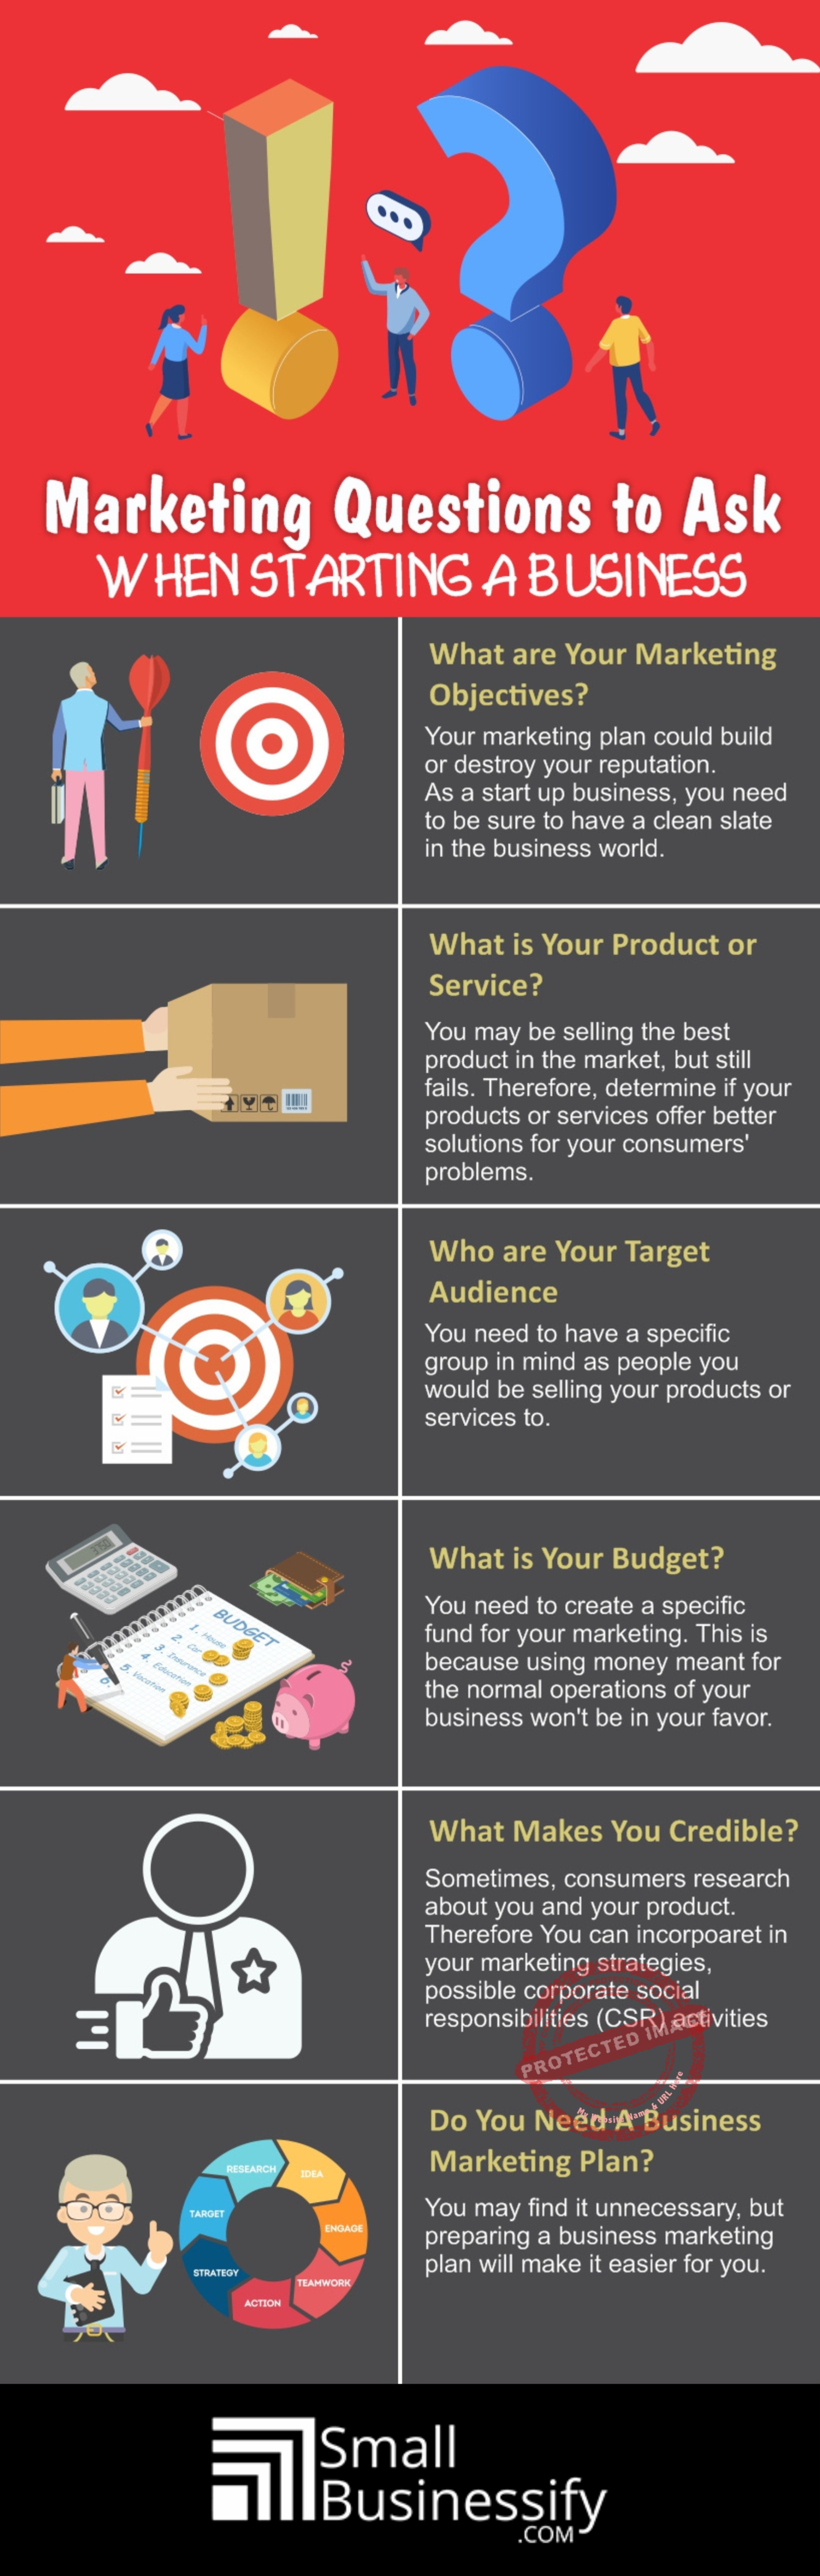 Marketing Questions to ask when starting a business Infographic